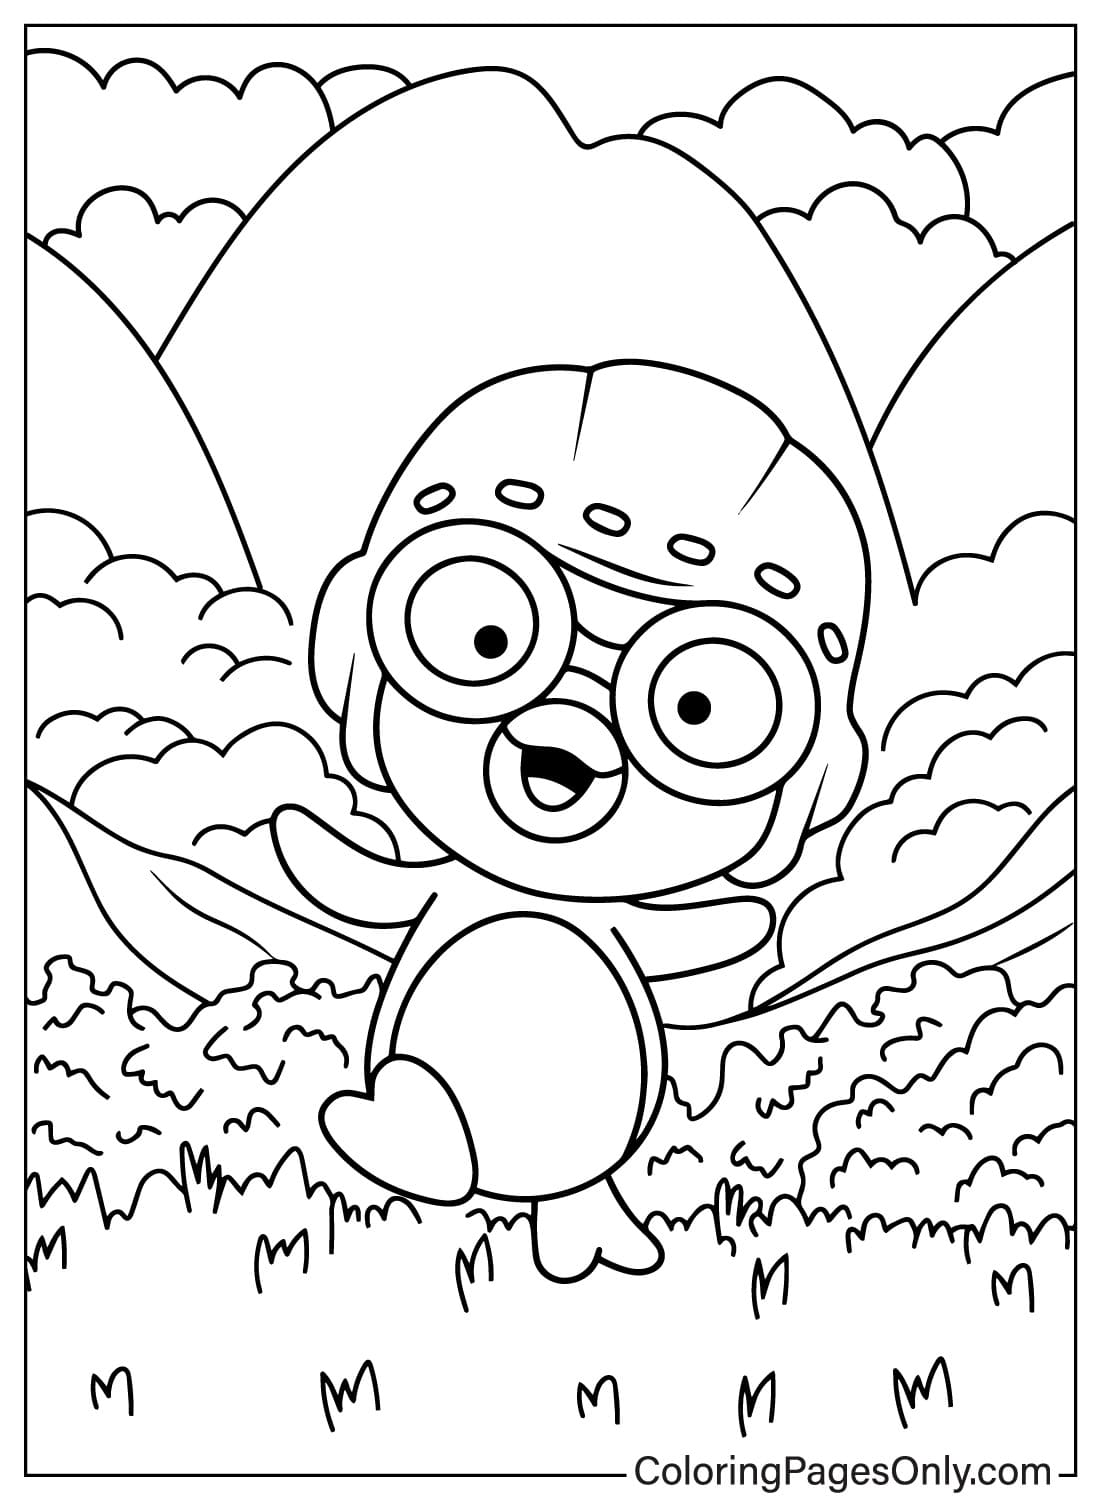 Cute Pororo Coloring Page from Pororo the Little Penguin